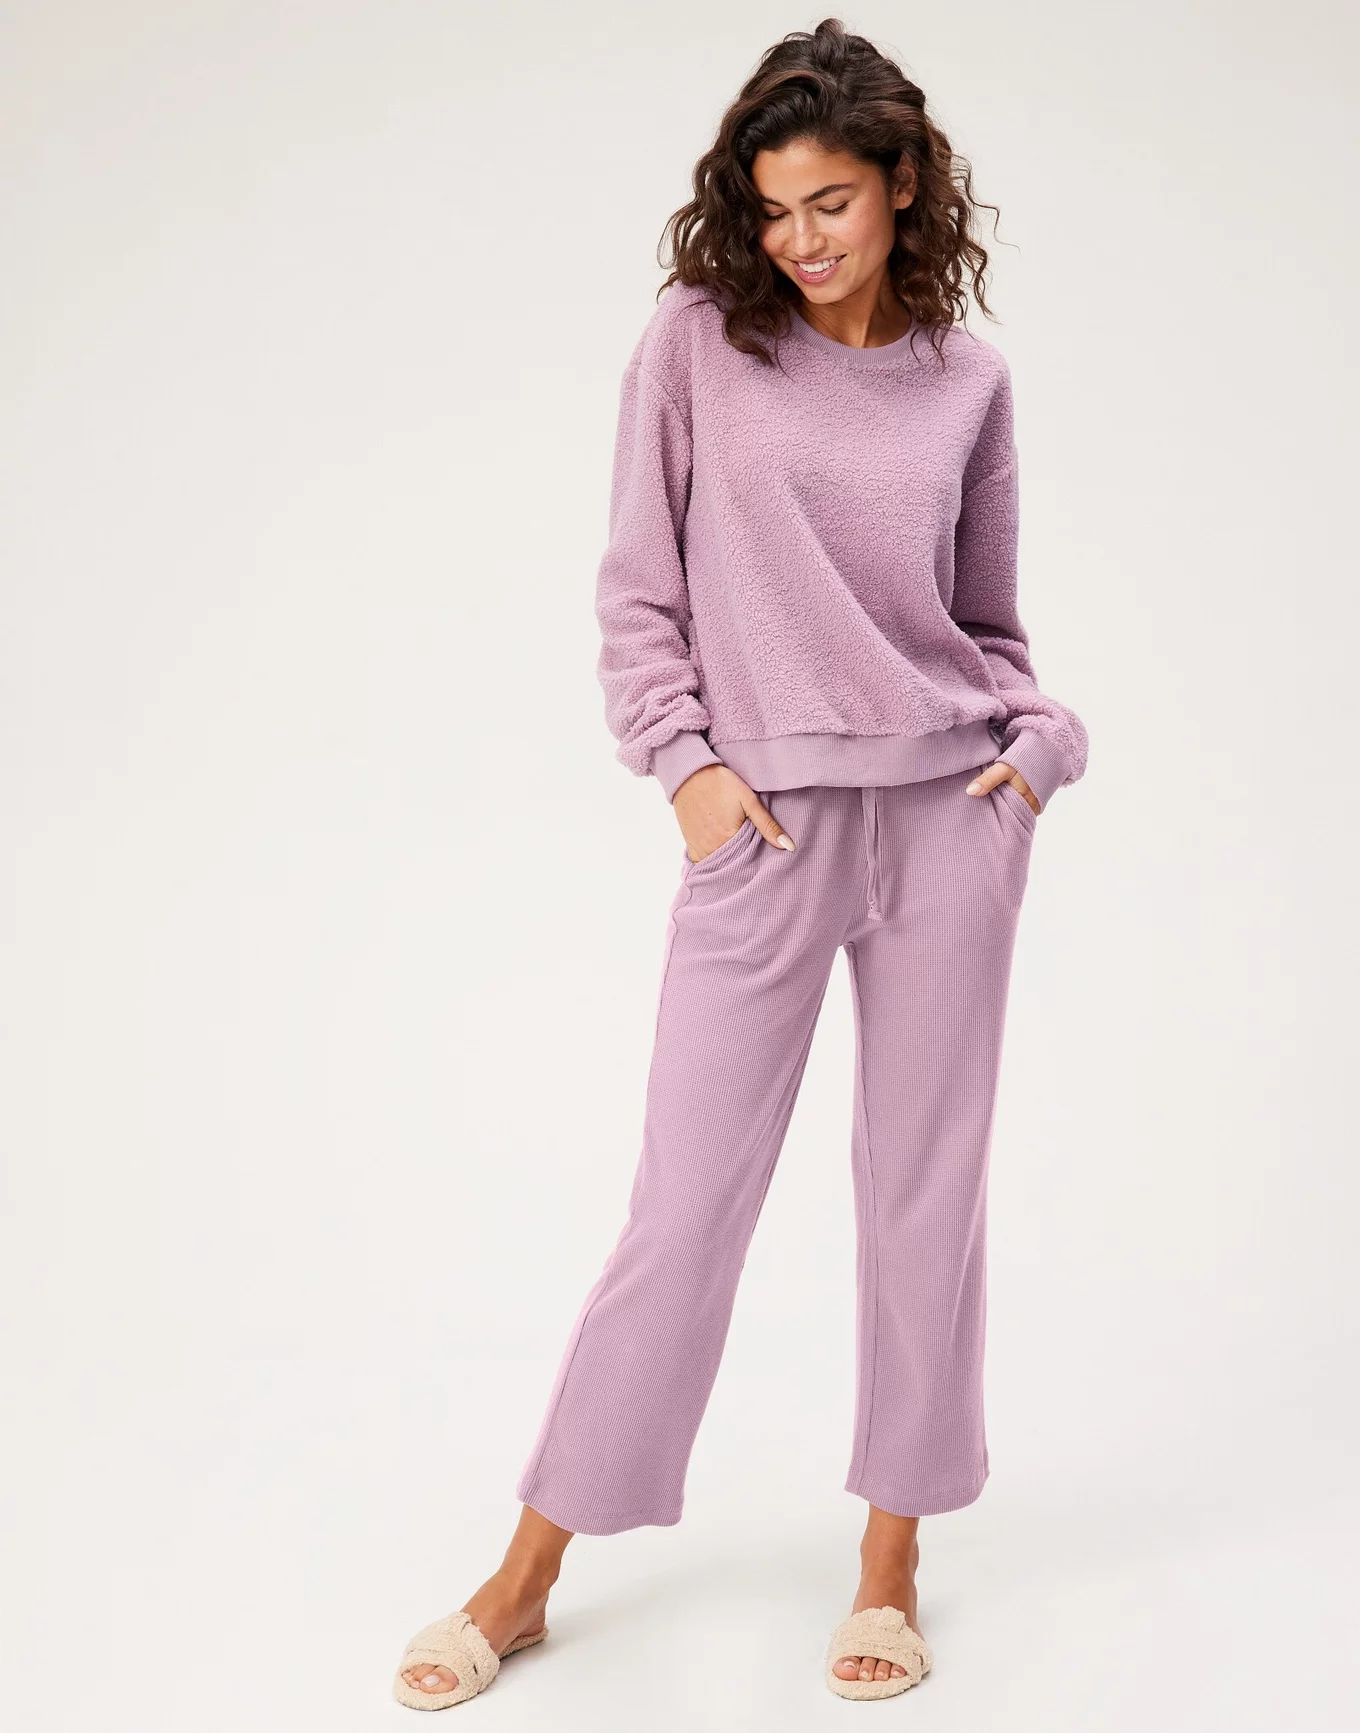 Amelis - Plum-colored heather tunic and pants set Select size S / M